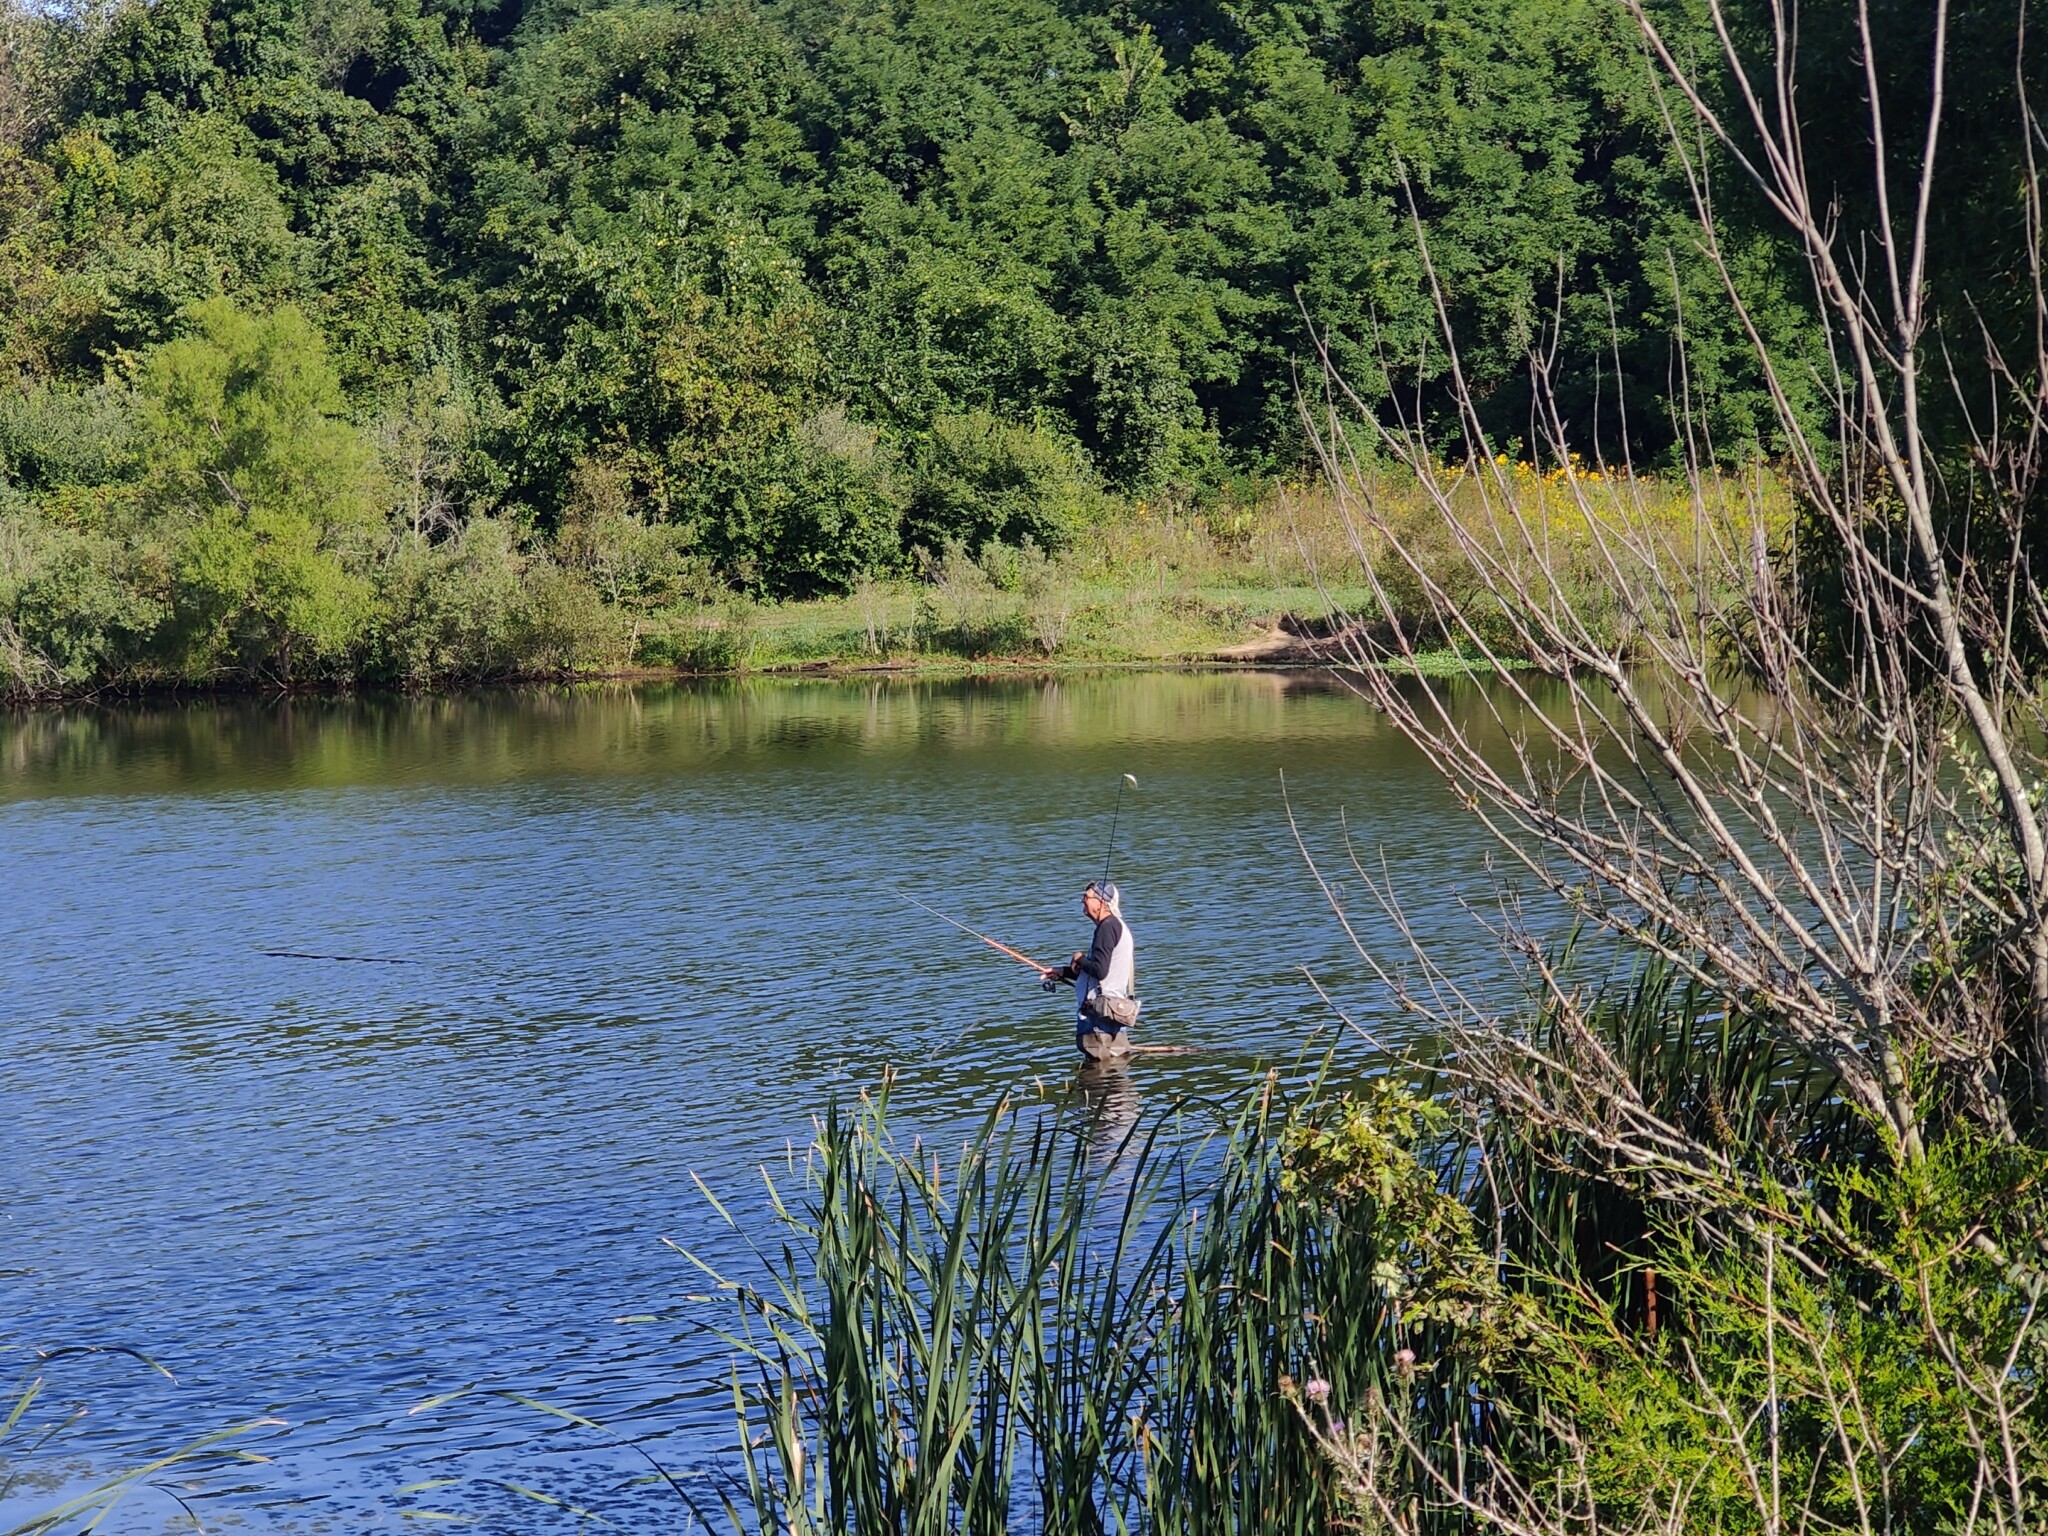 Conservation Area pond provides exceptional fishing opportunities